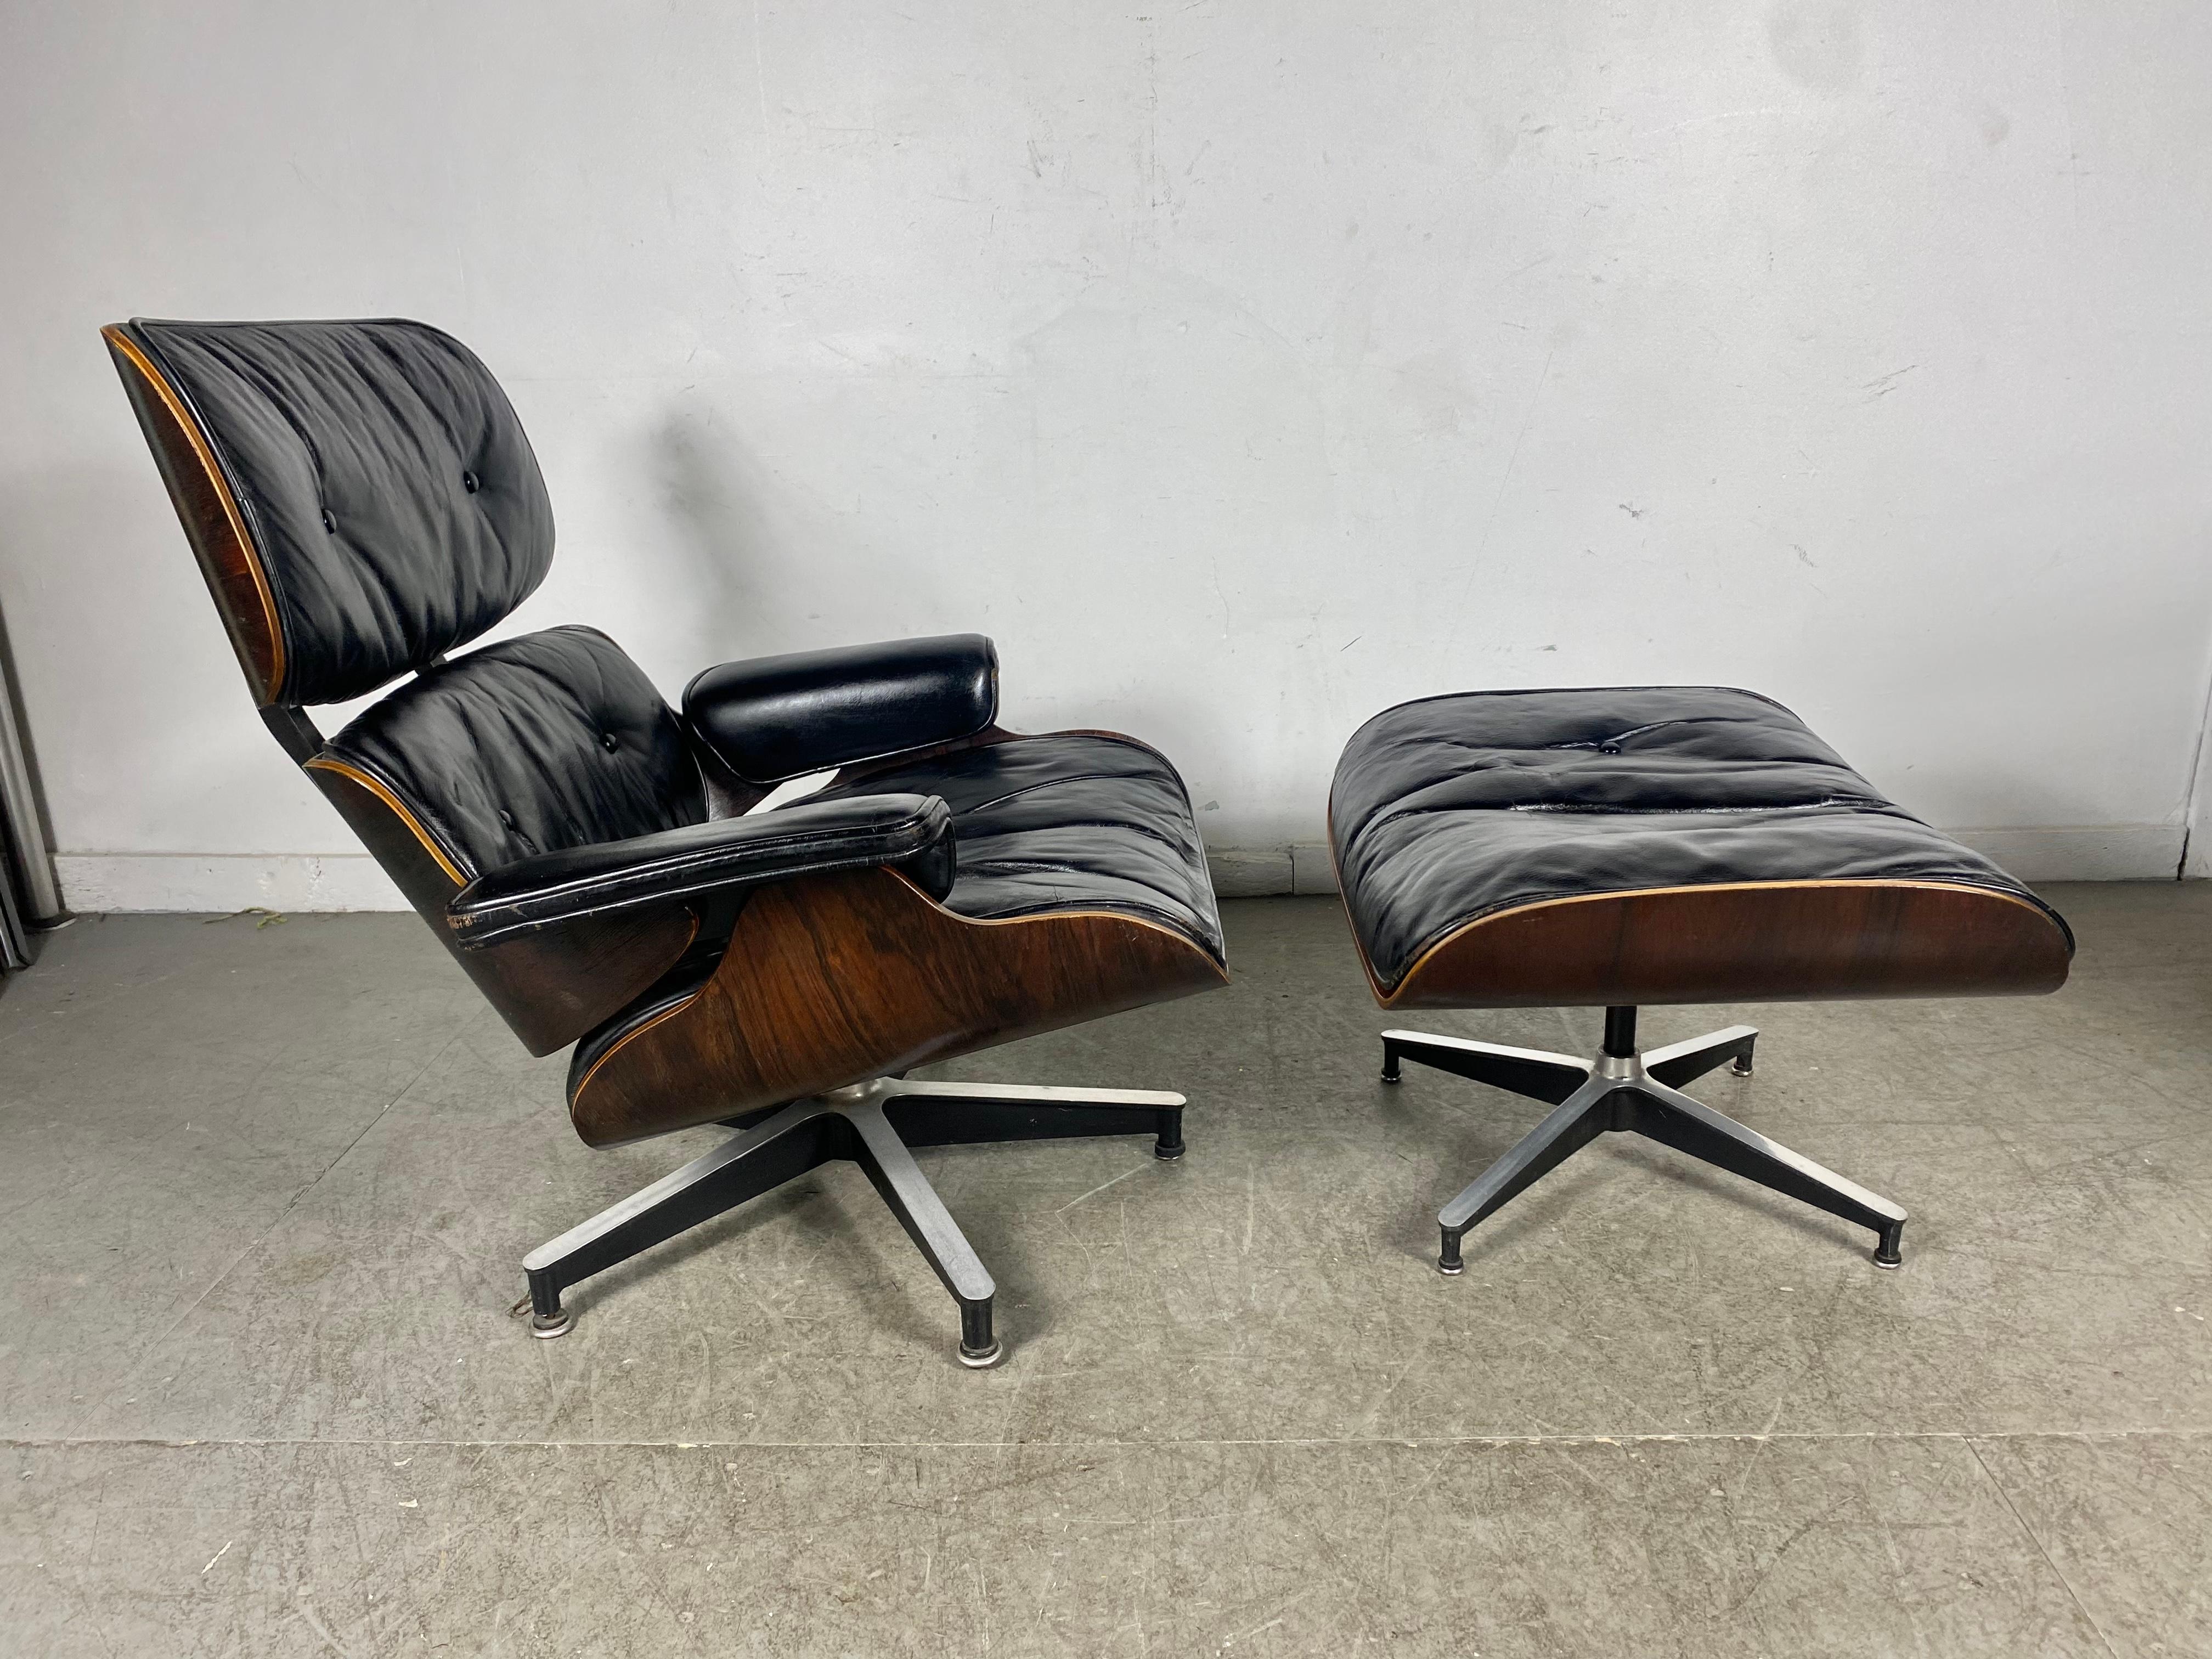 Mid-20th Century Rare 1st Generation Eames Lounge Chair and Ottoman, Brazilian Rosewood, Leather